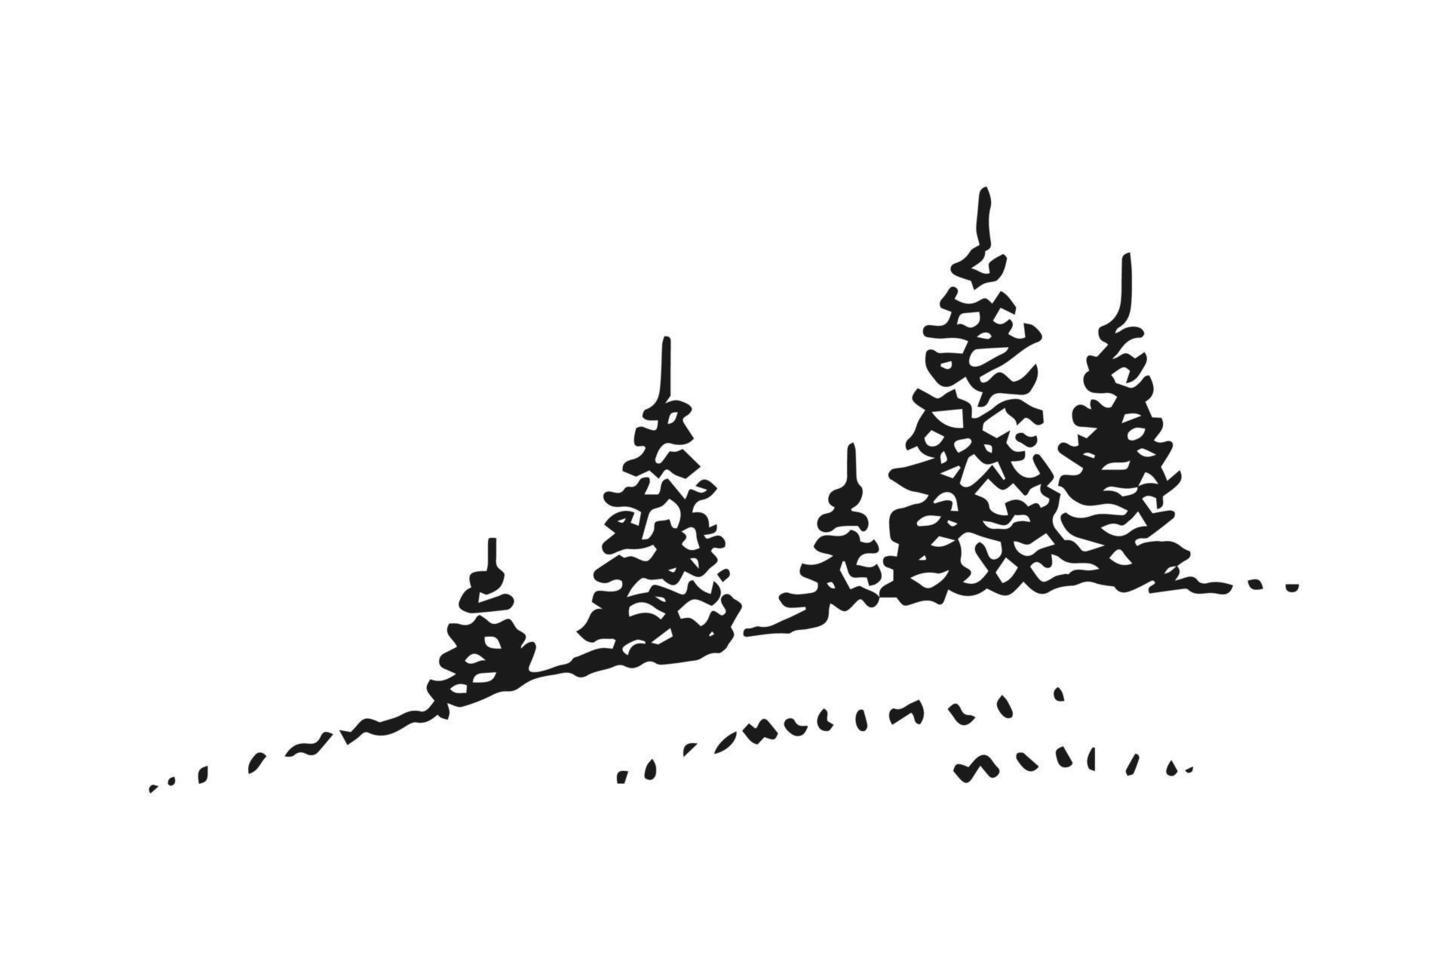 Sketch of wild nature with forest. Hand drawn illustration converted to vector. vector